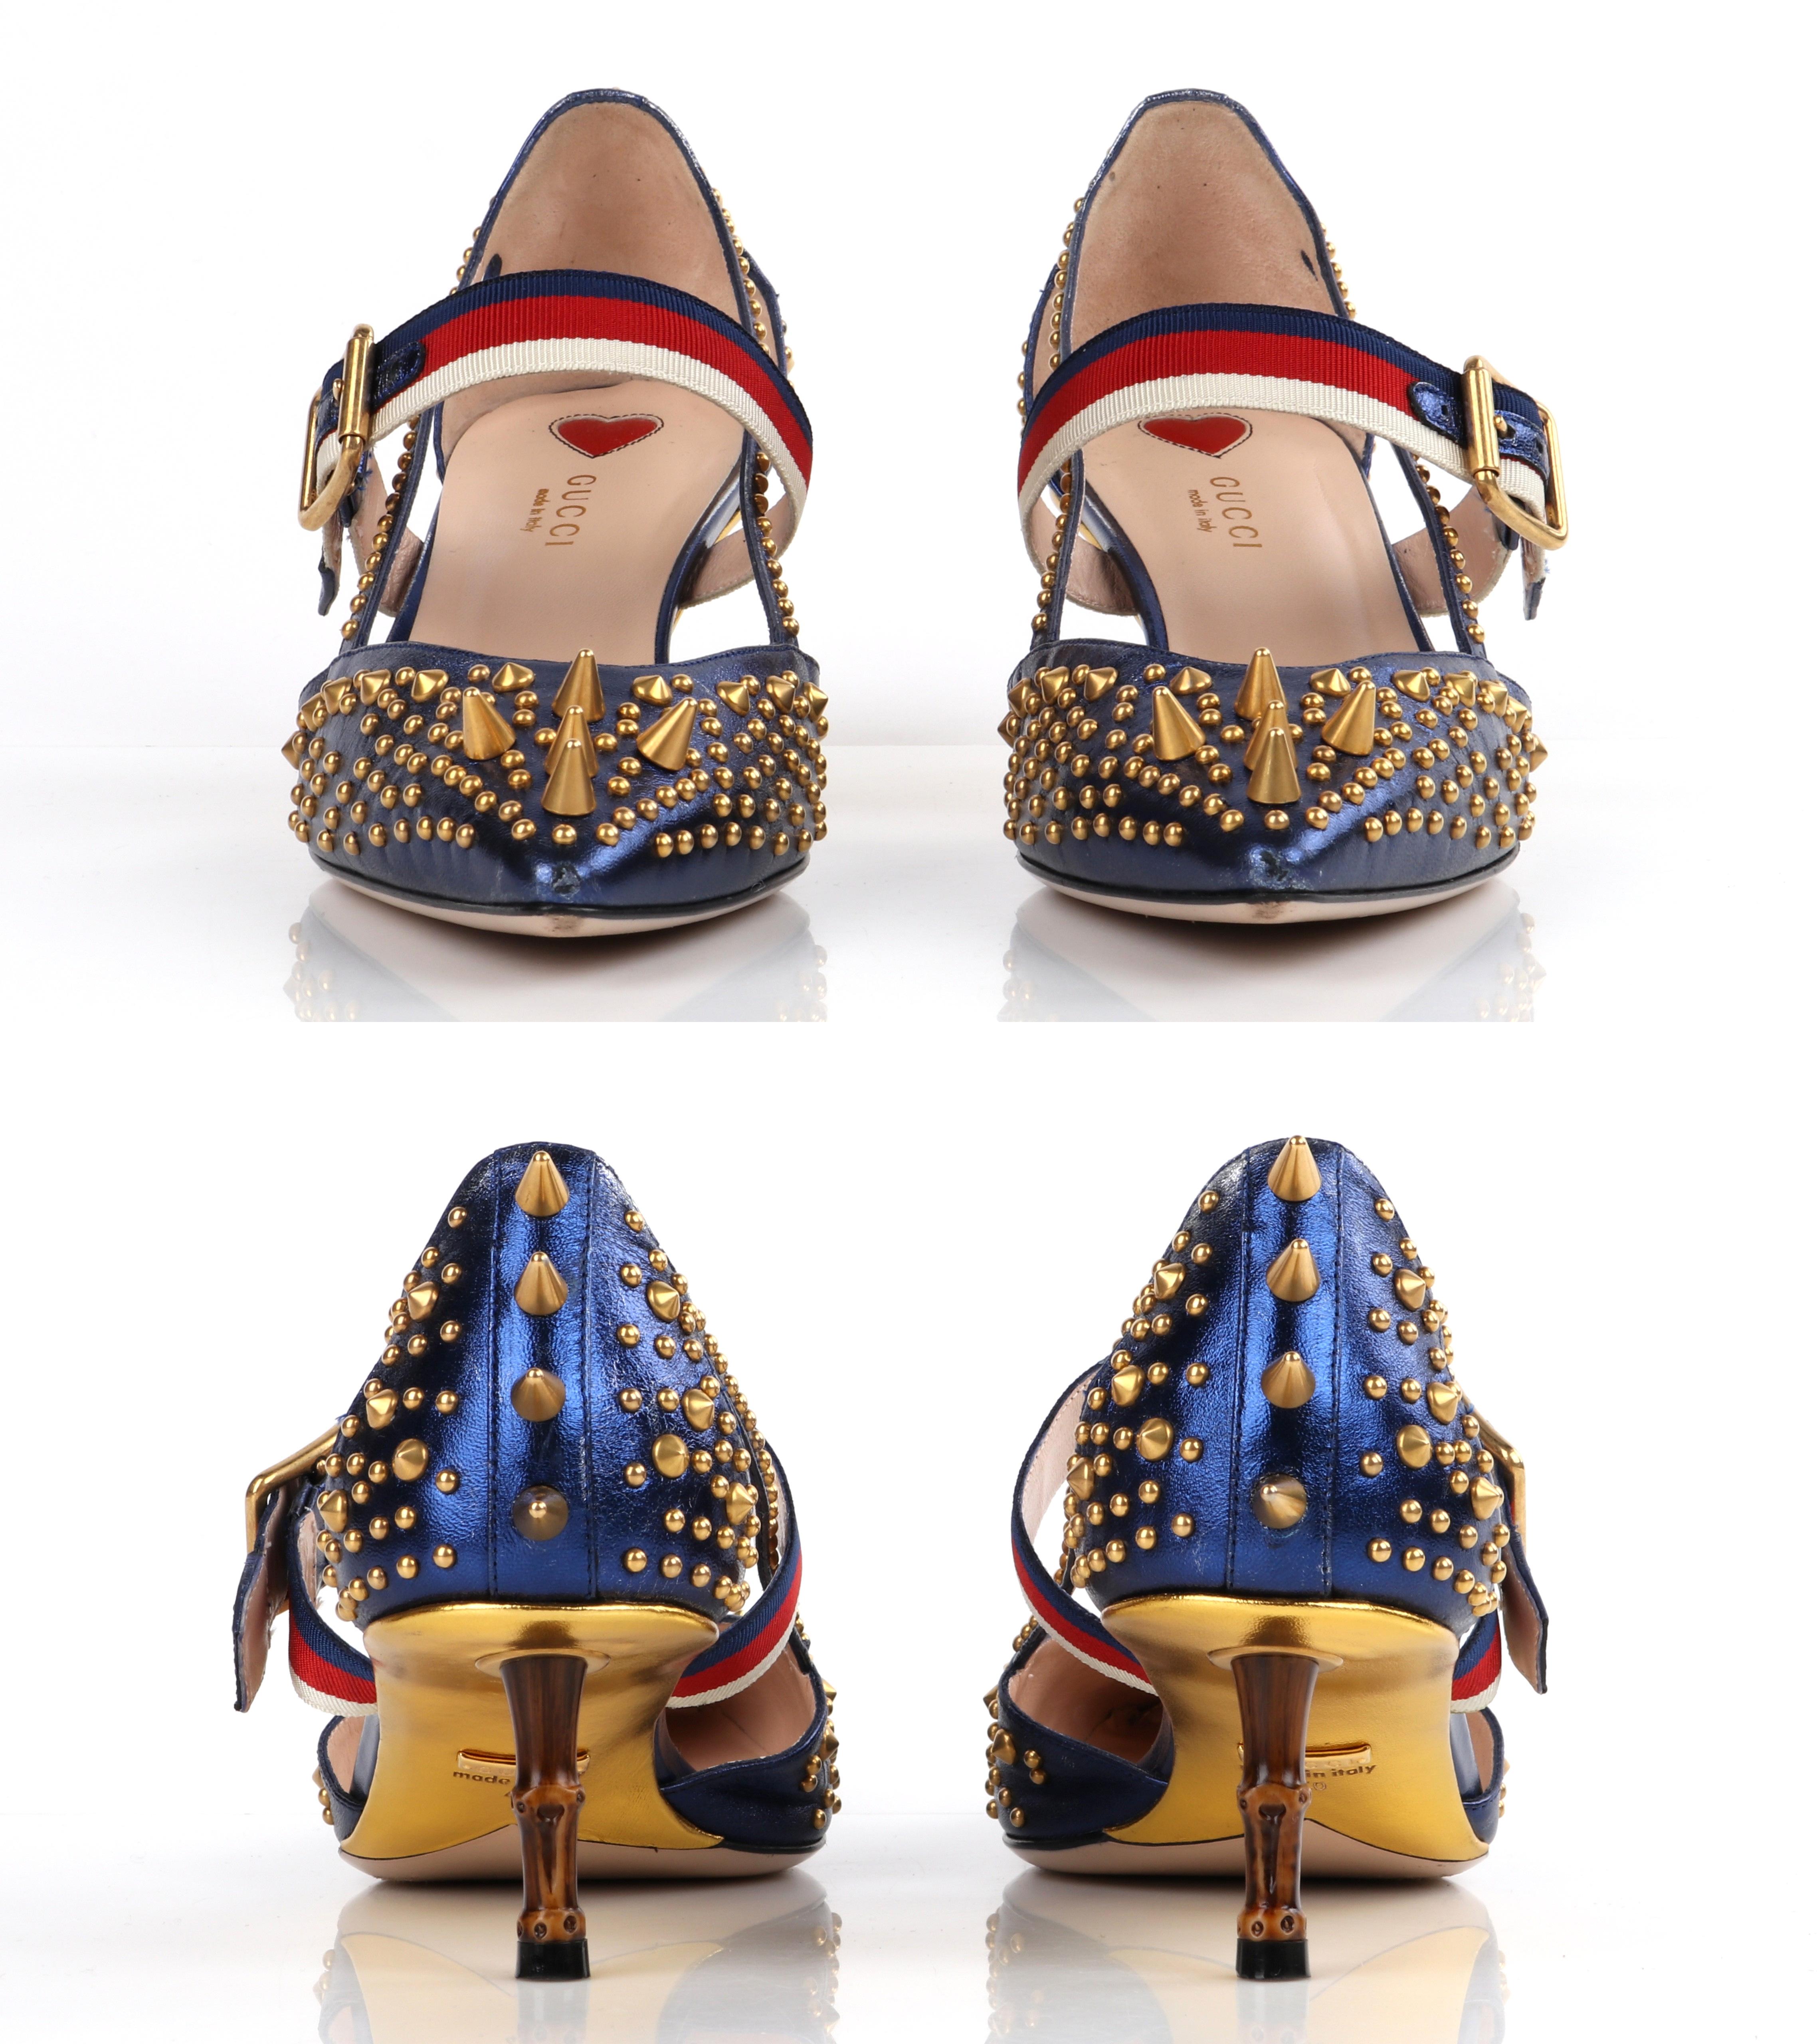 GUCCI Resort 2017 “Unia” Metallic Blue Leather Gold Spike Stud Kitten Heel Pumps In Good Condition For Sale In Thiensville, WI